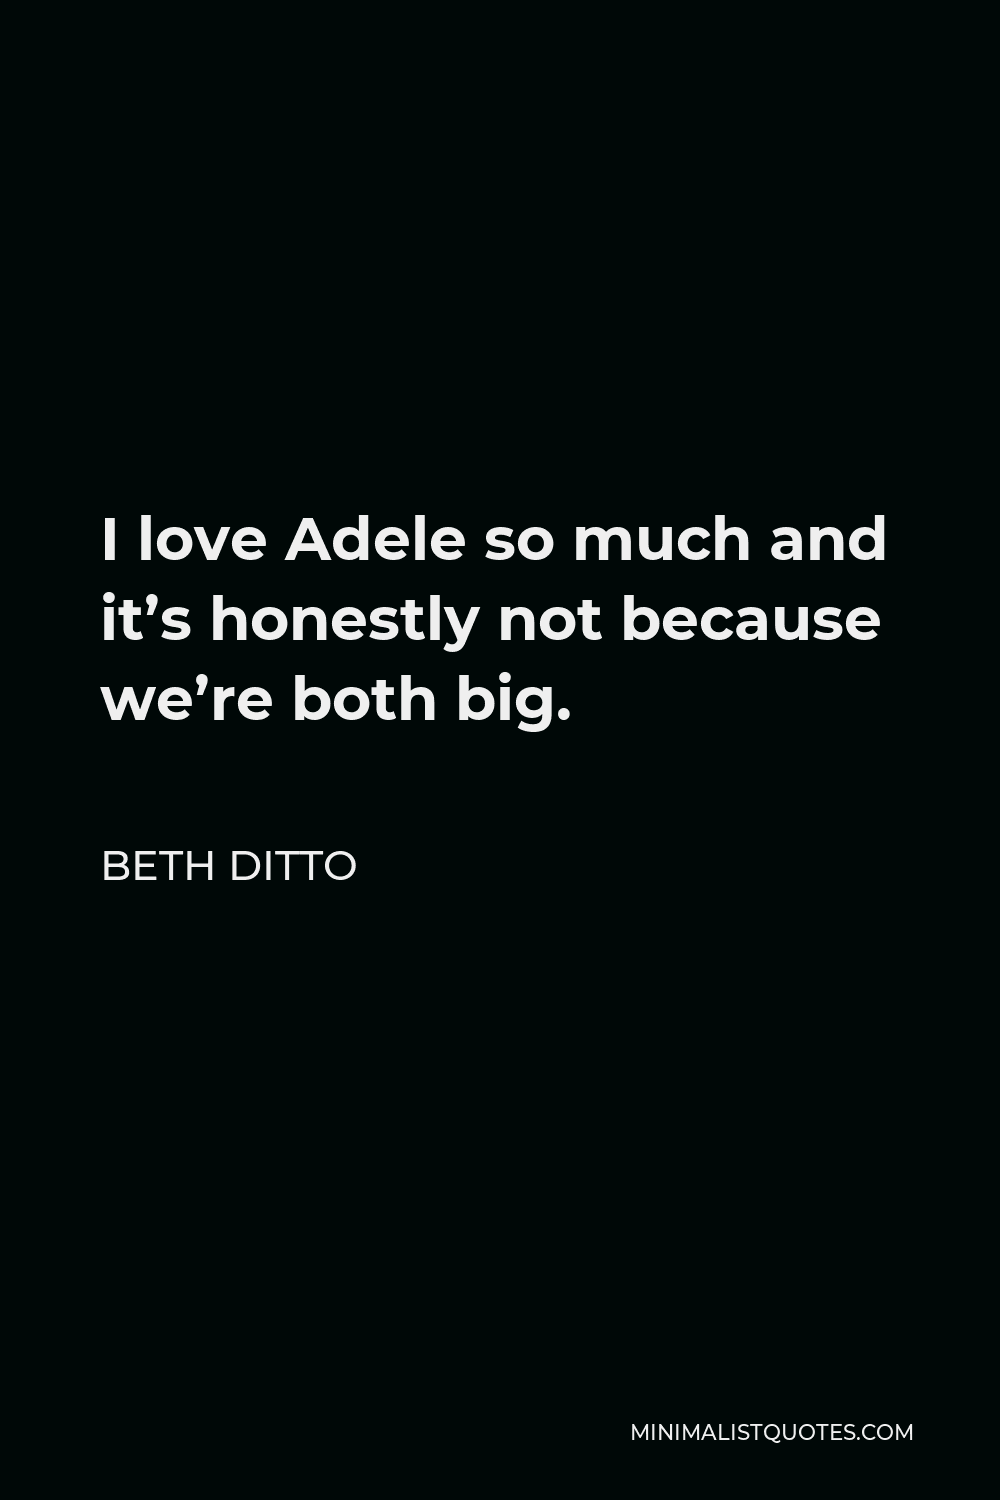 Beth Ditto Quote - I love Adele so much and it’s honestly not because we’re both big.